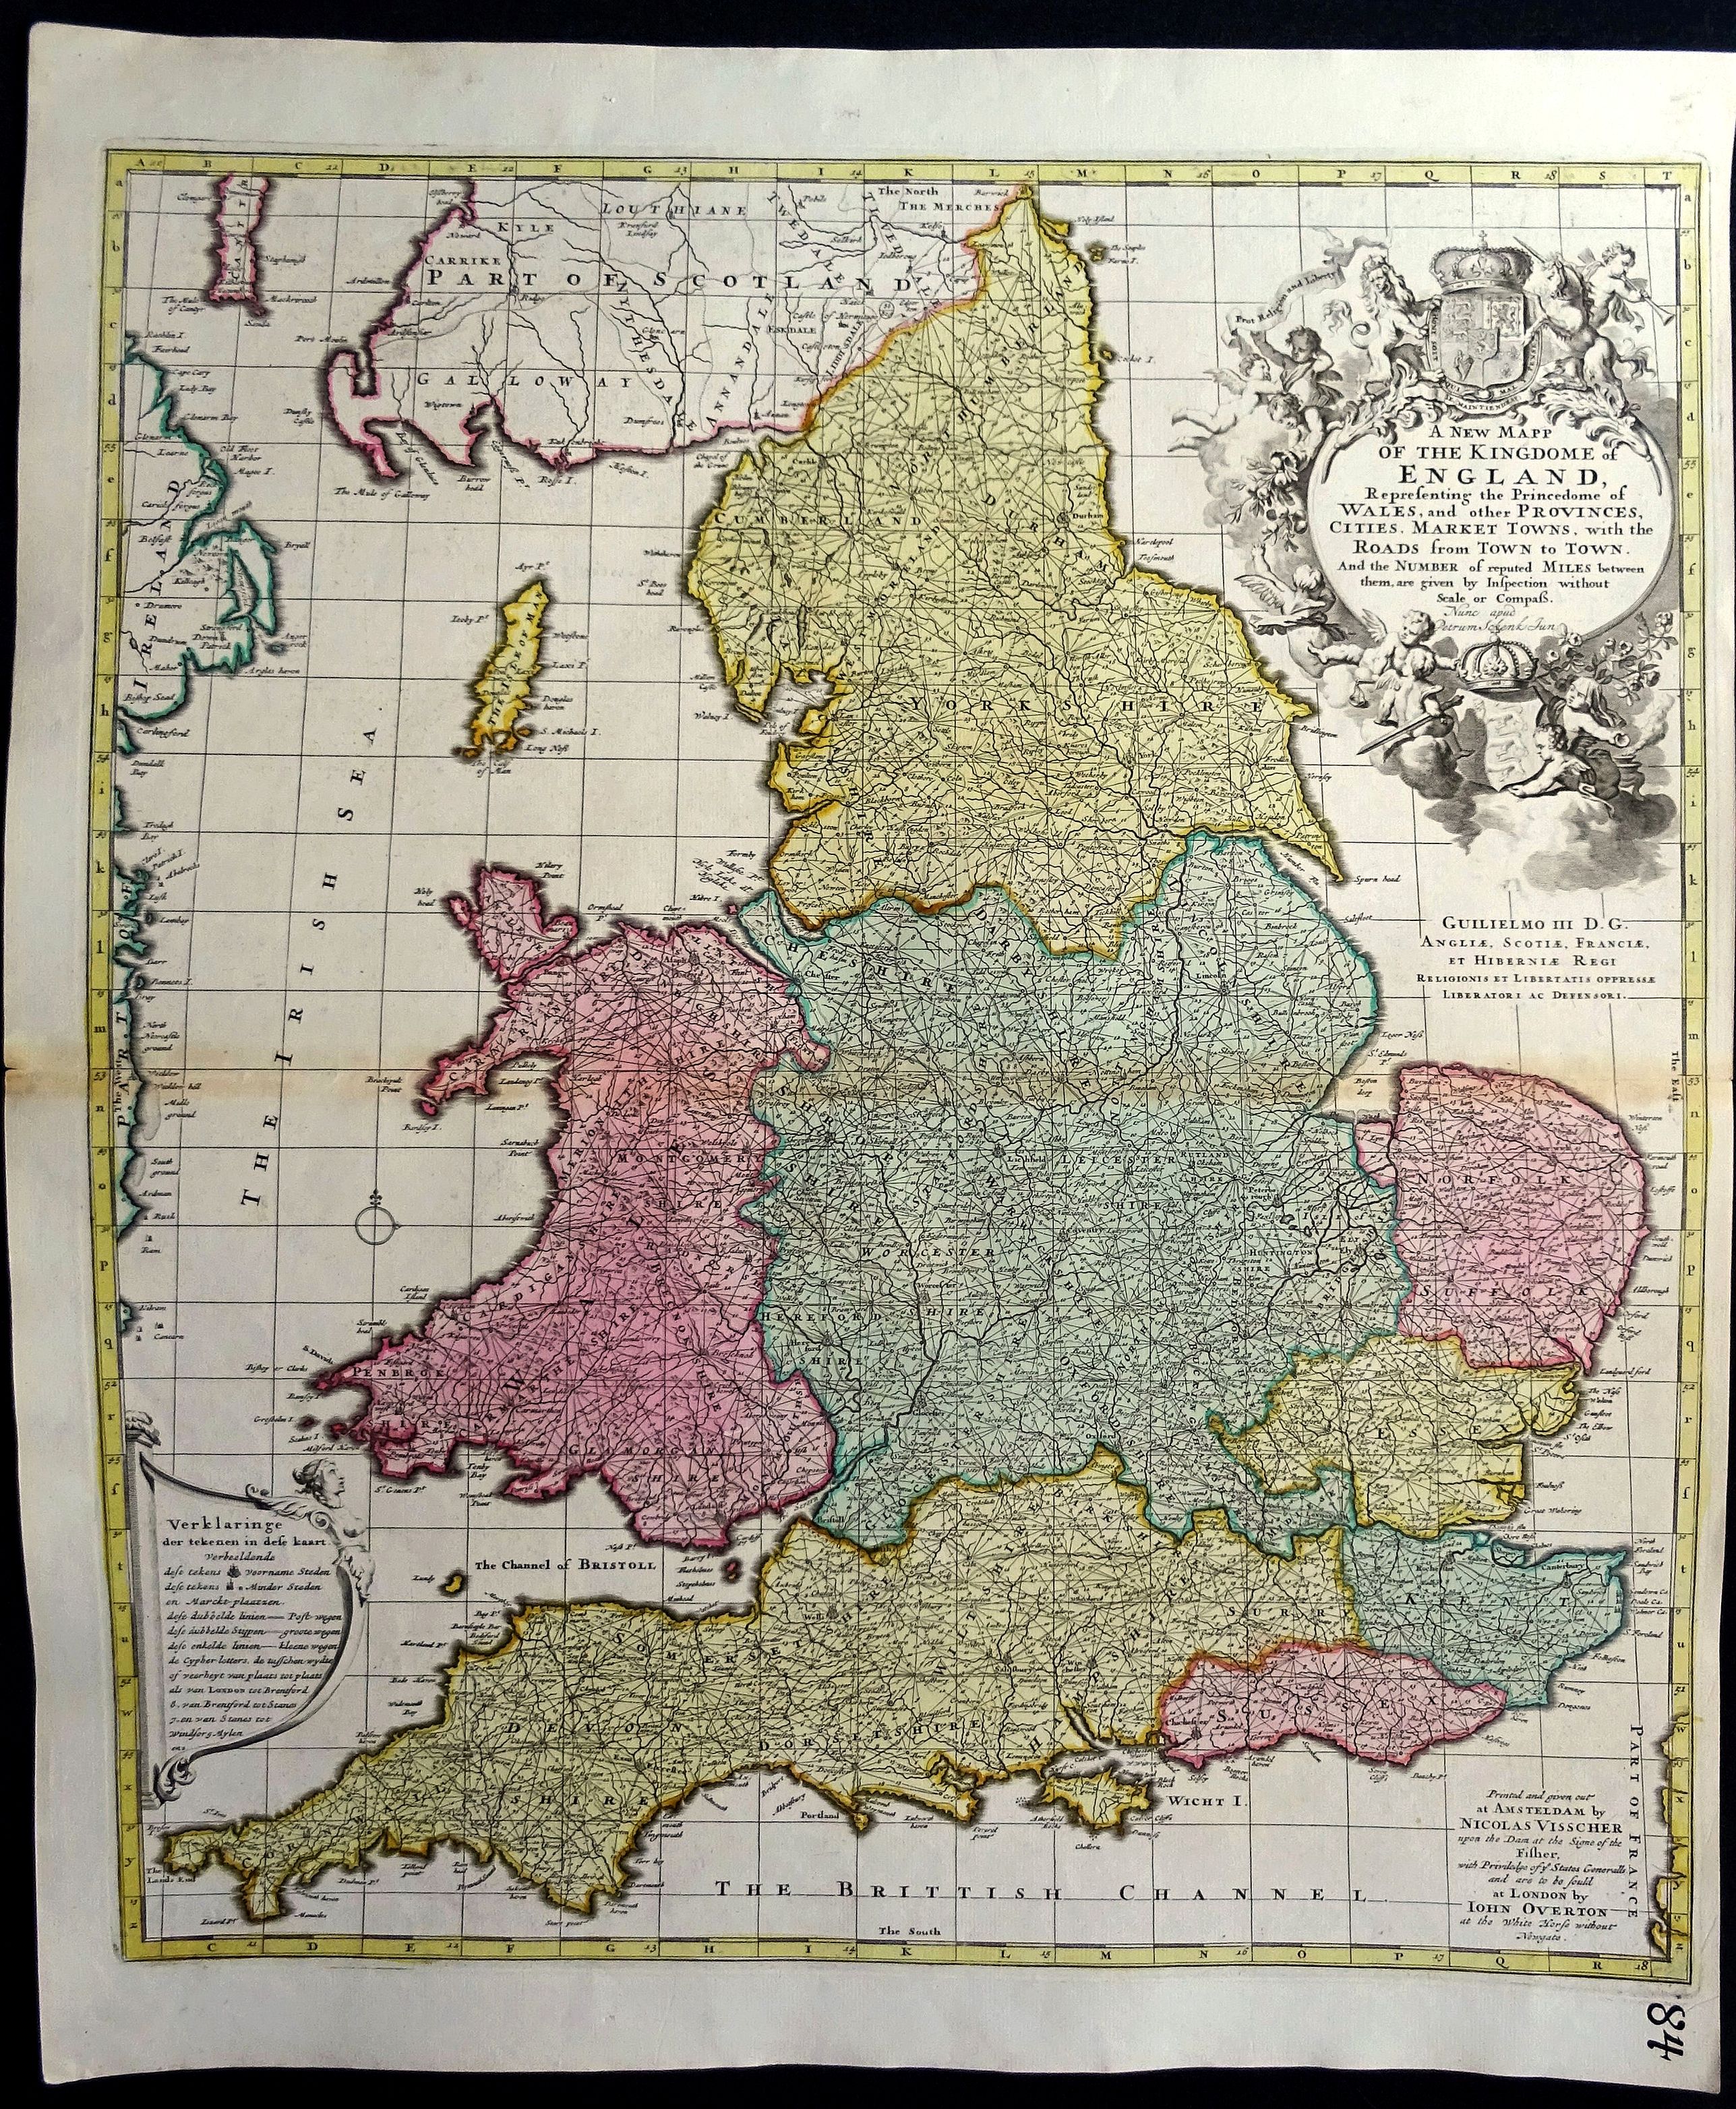 A New Mapp of the Kingdome of England, Representing the Princedome of Wales, and other Provinces, Cities, Market Towns, with the Roads from Town to Town.